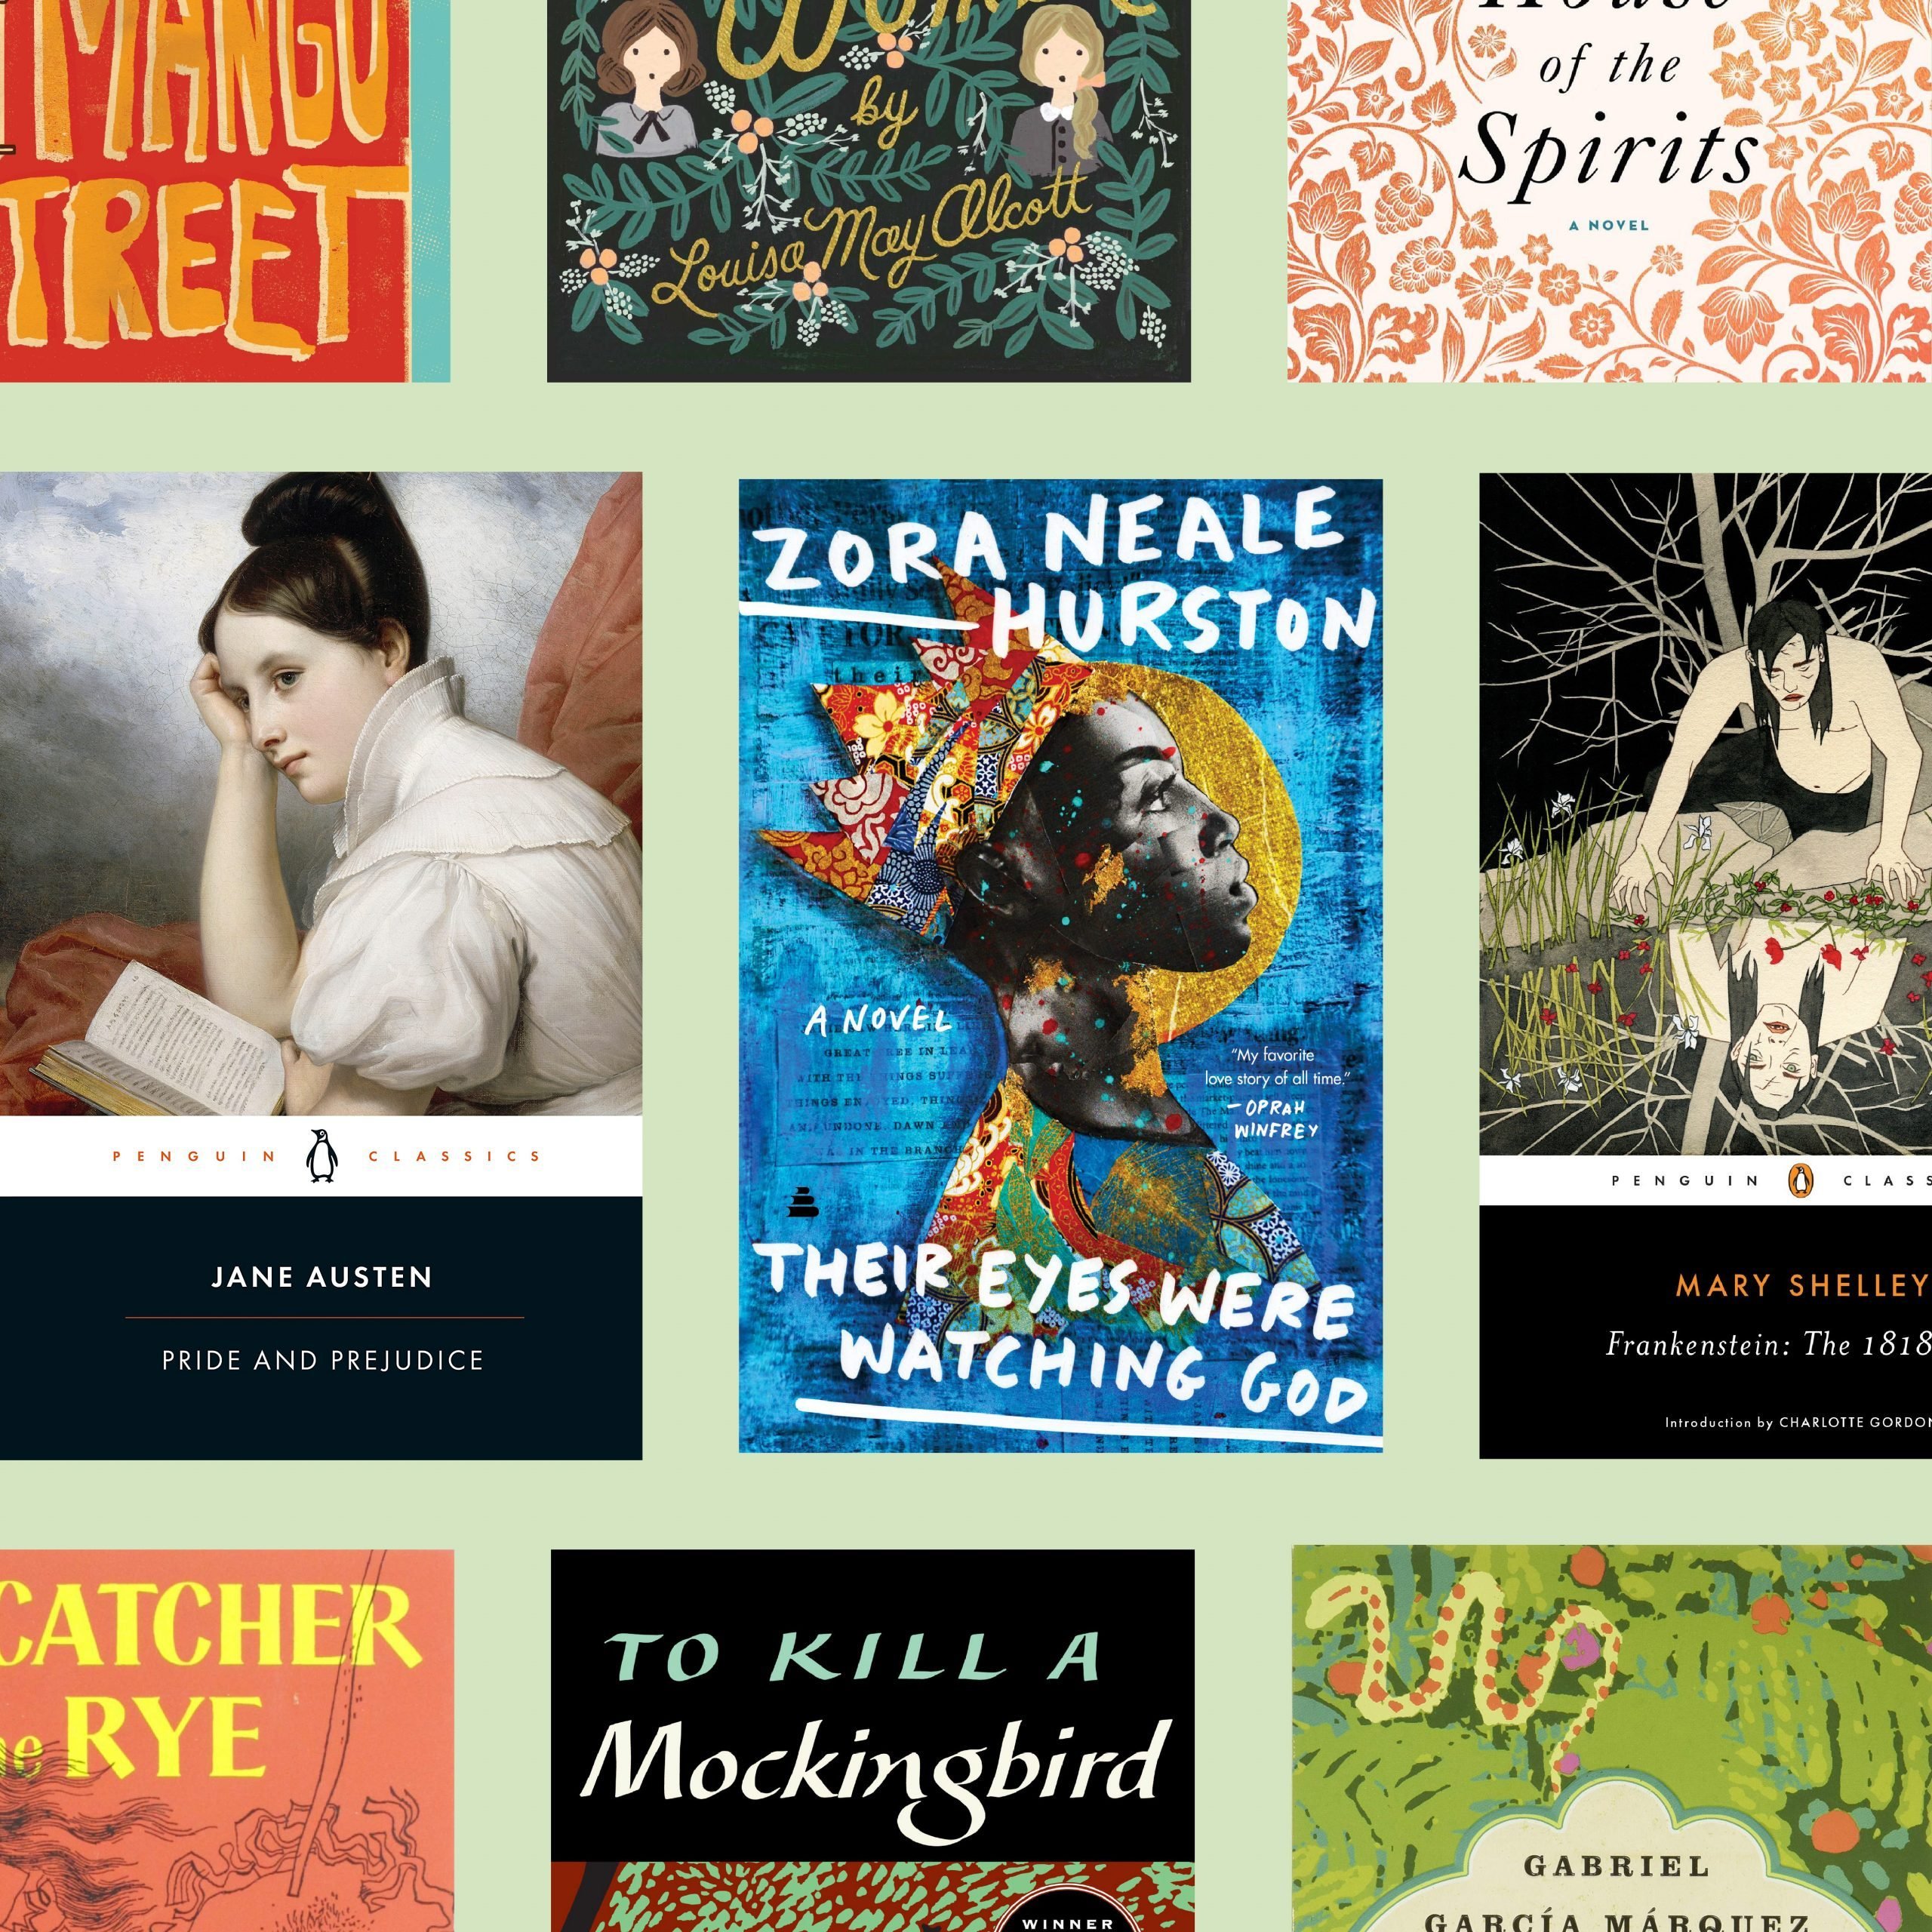 The Catcher in the Rye: 100 Best YA Books of All Time